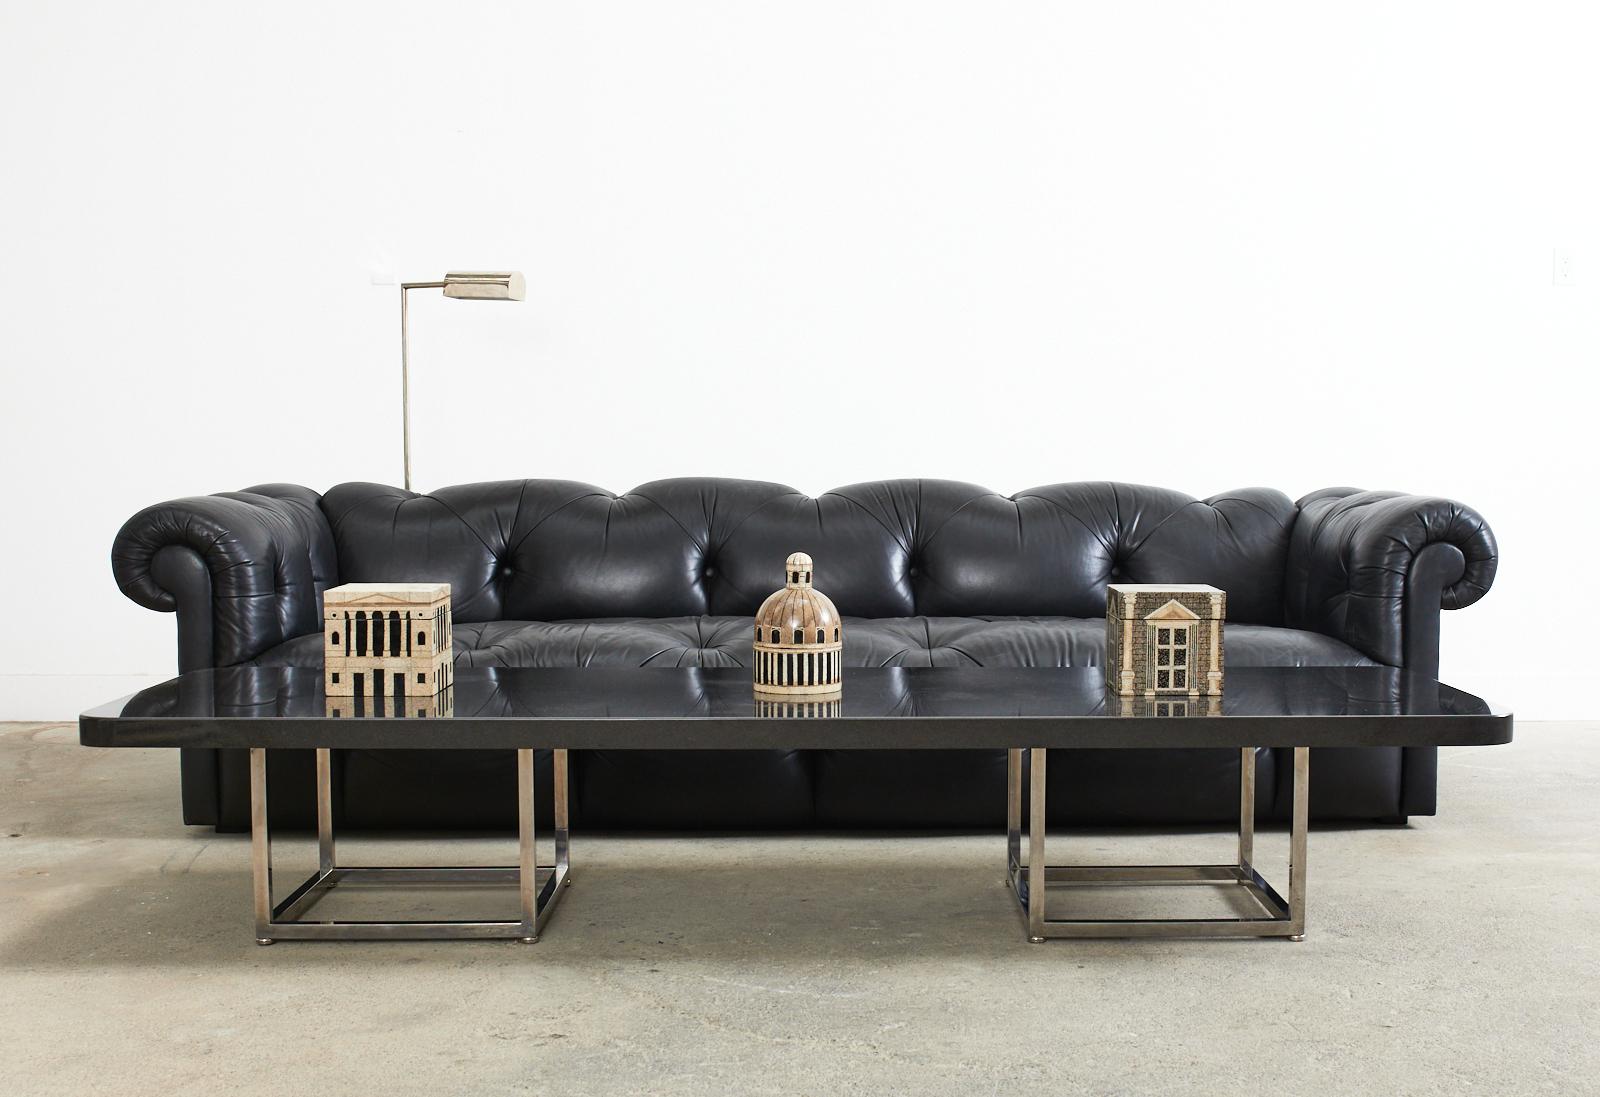 Grand bespoke black leather English chesterfield style tufted leather sofa designed by Sally Sirkin Lewis for J. Robert Scott & Assoc. Sirkin's modern redux of a classic English sofa features a hardwood frame with large English rolled arms